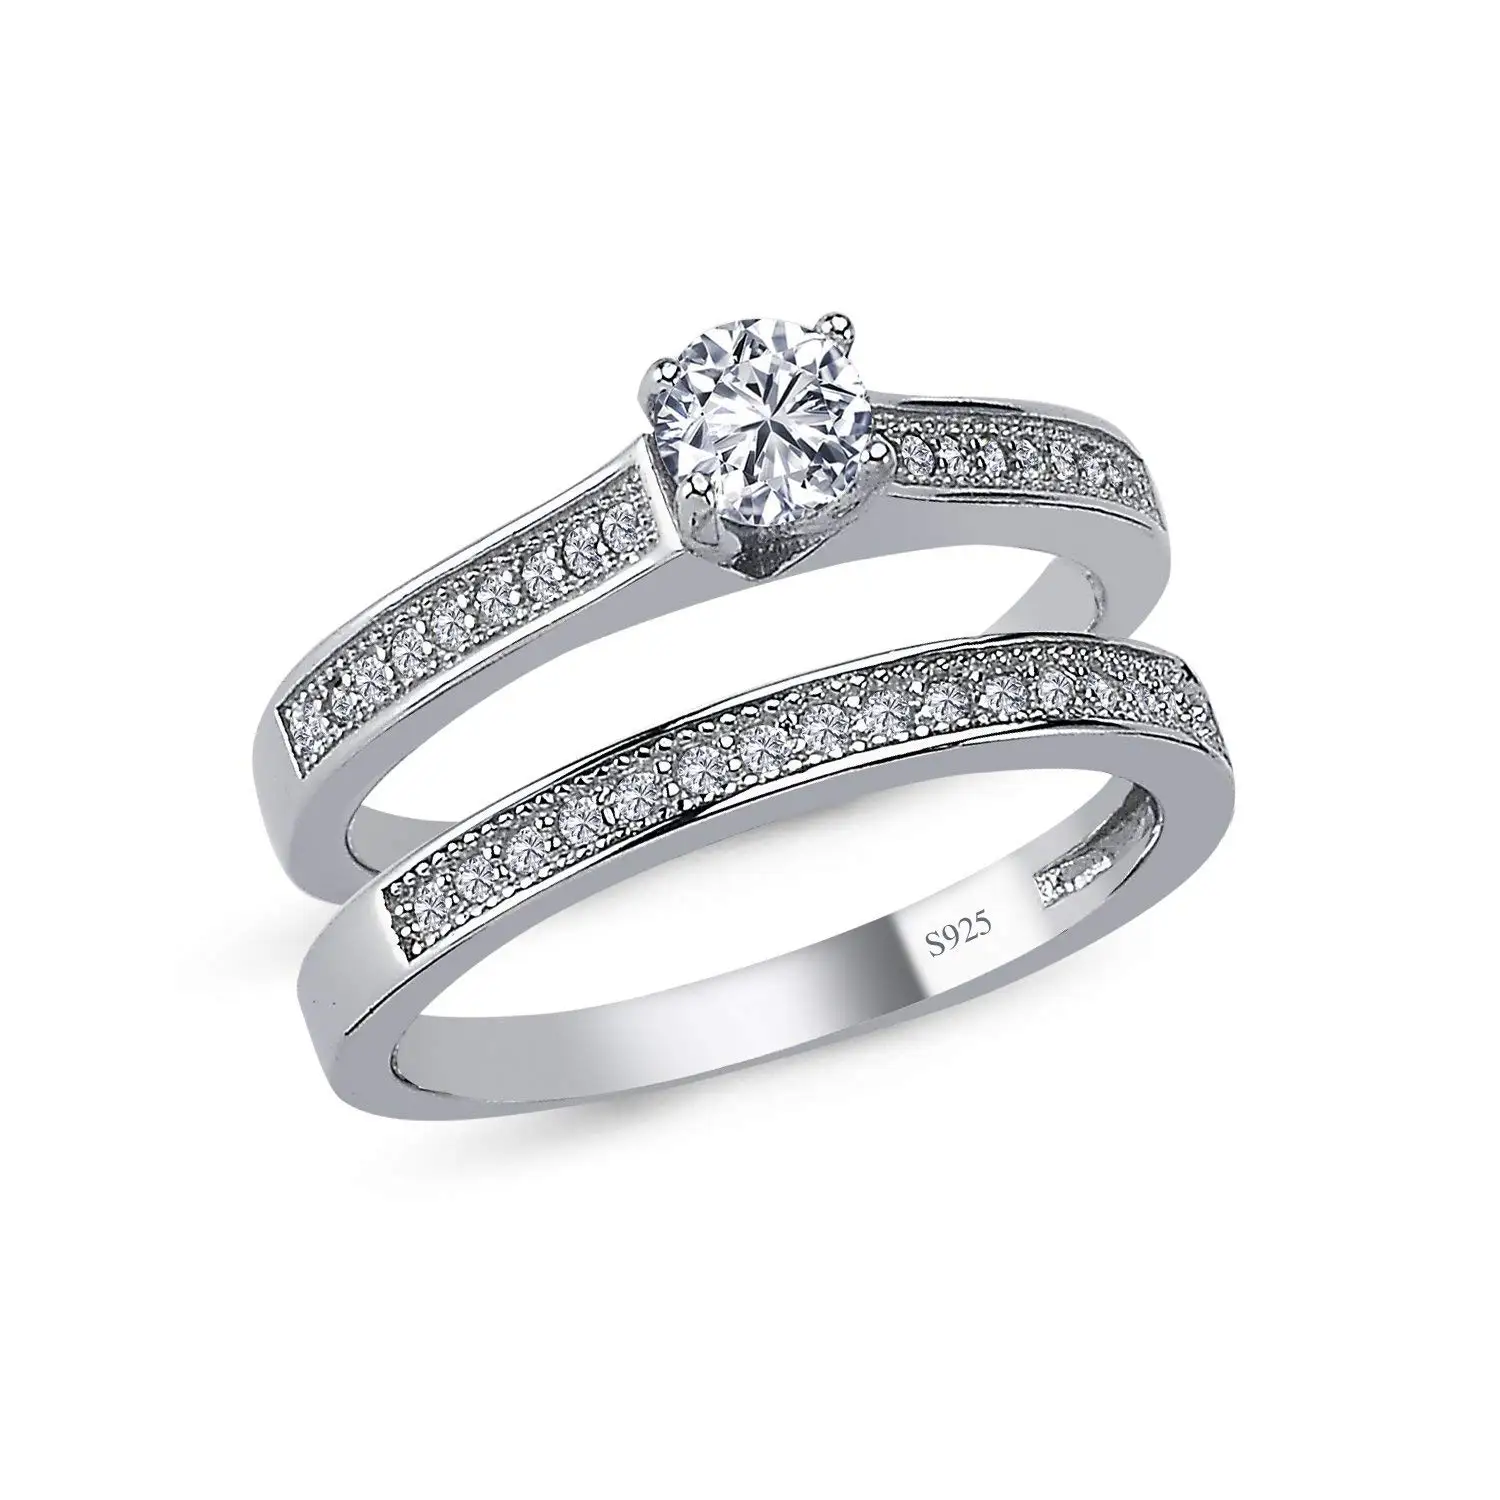 Cheap Cz Wedding Rings Sets Find Cz Wedding Rings Sets Deals On